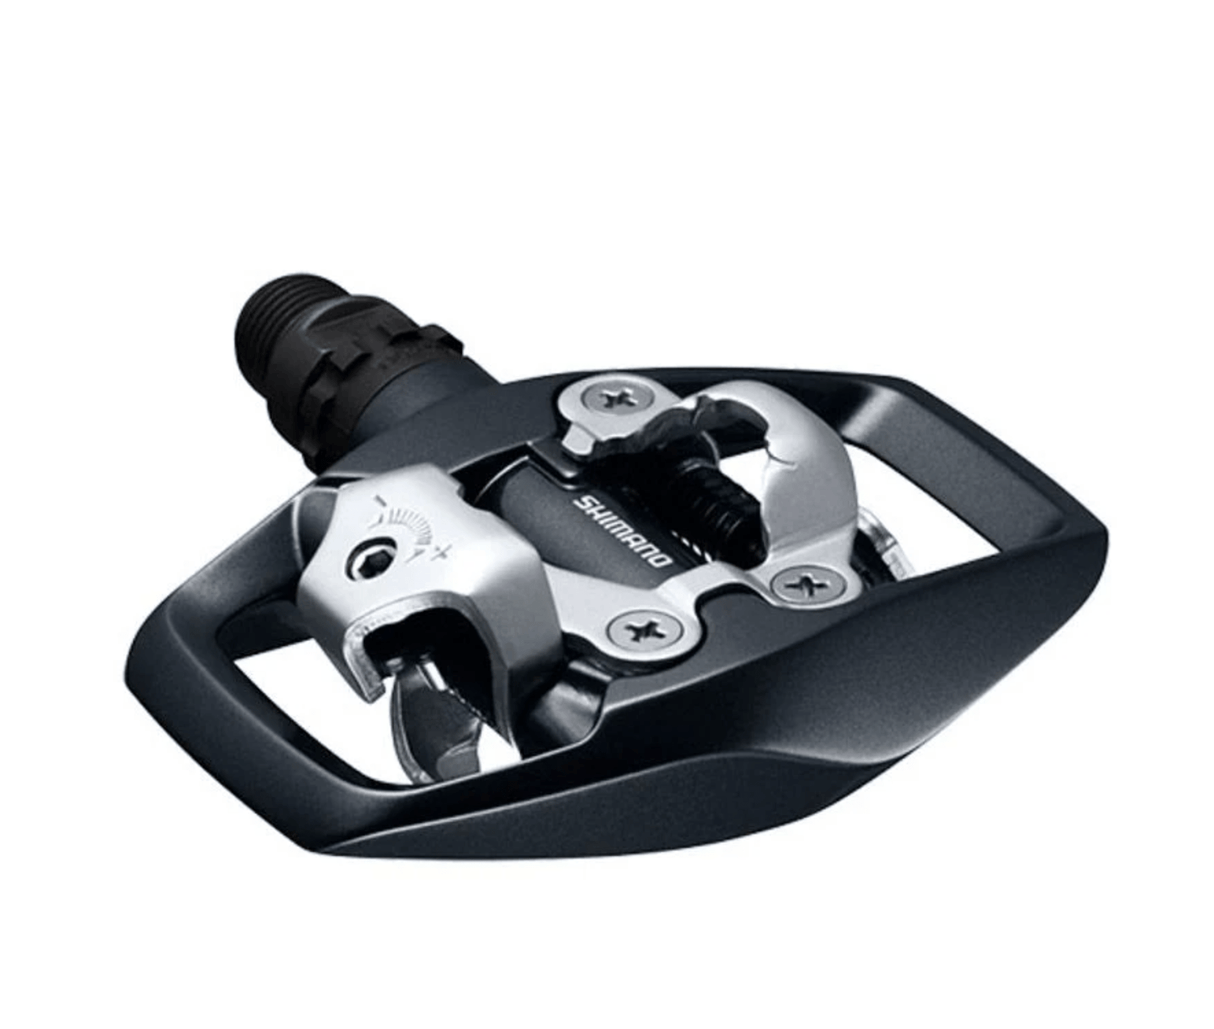 Shimano PD-ED500 SPD Light Action Touring Pedals